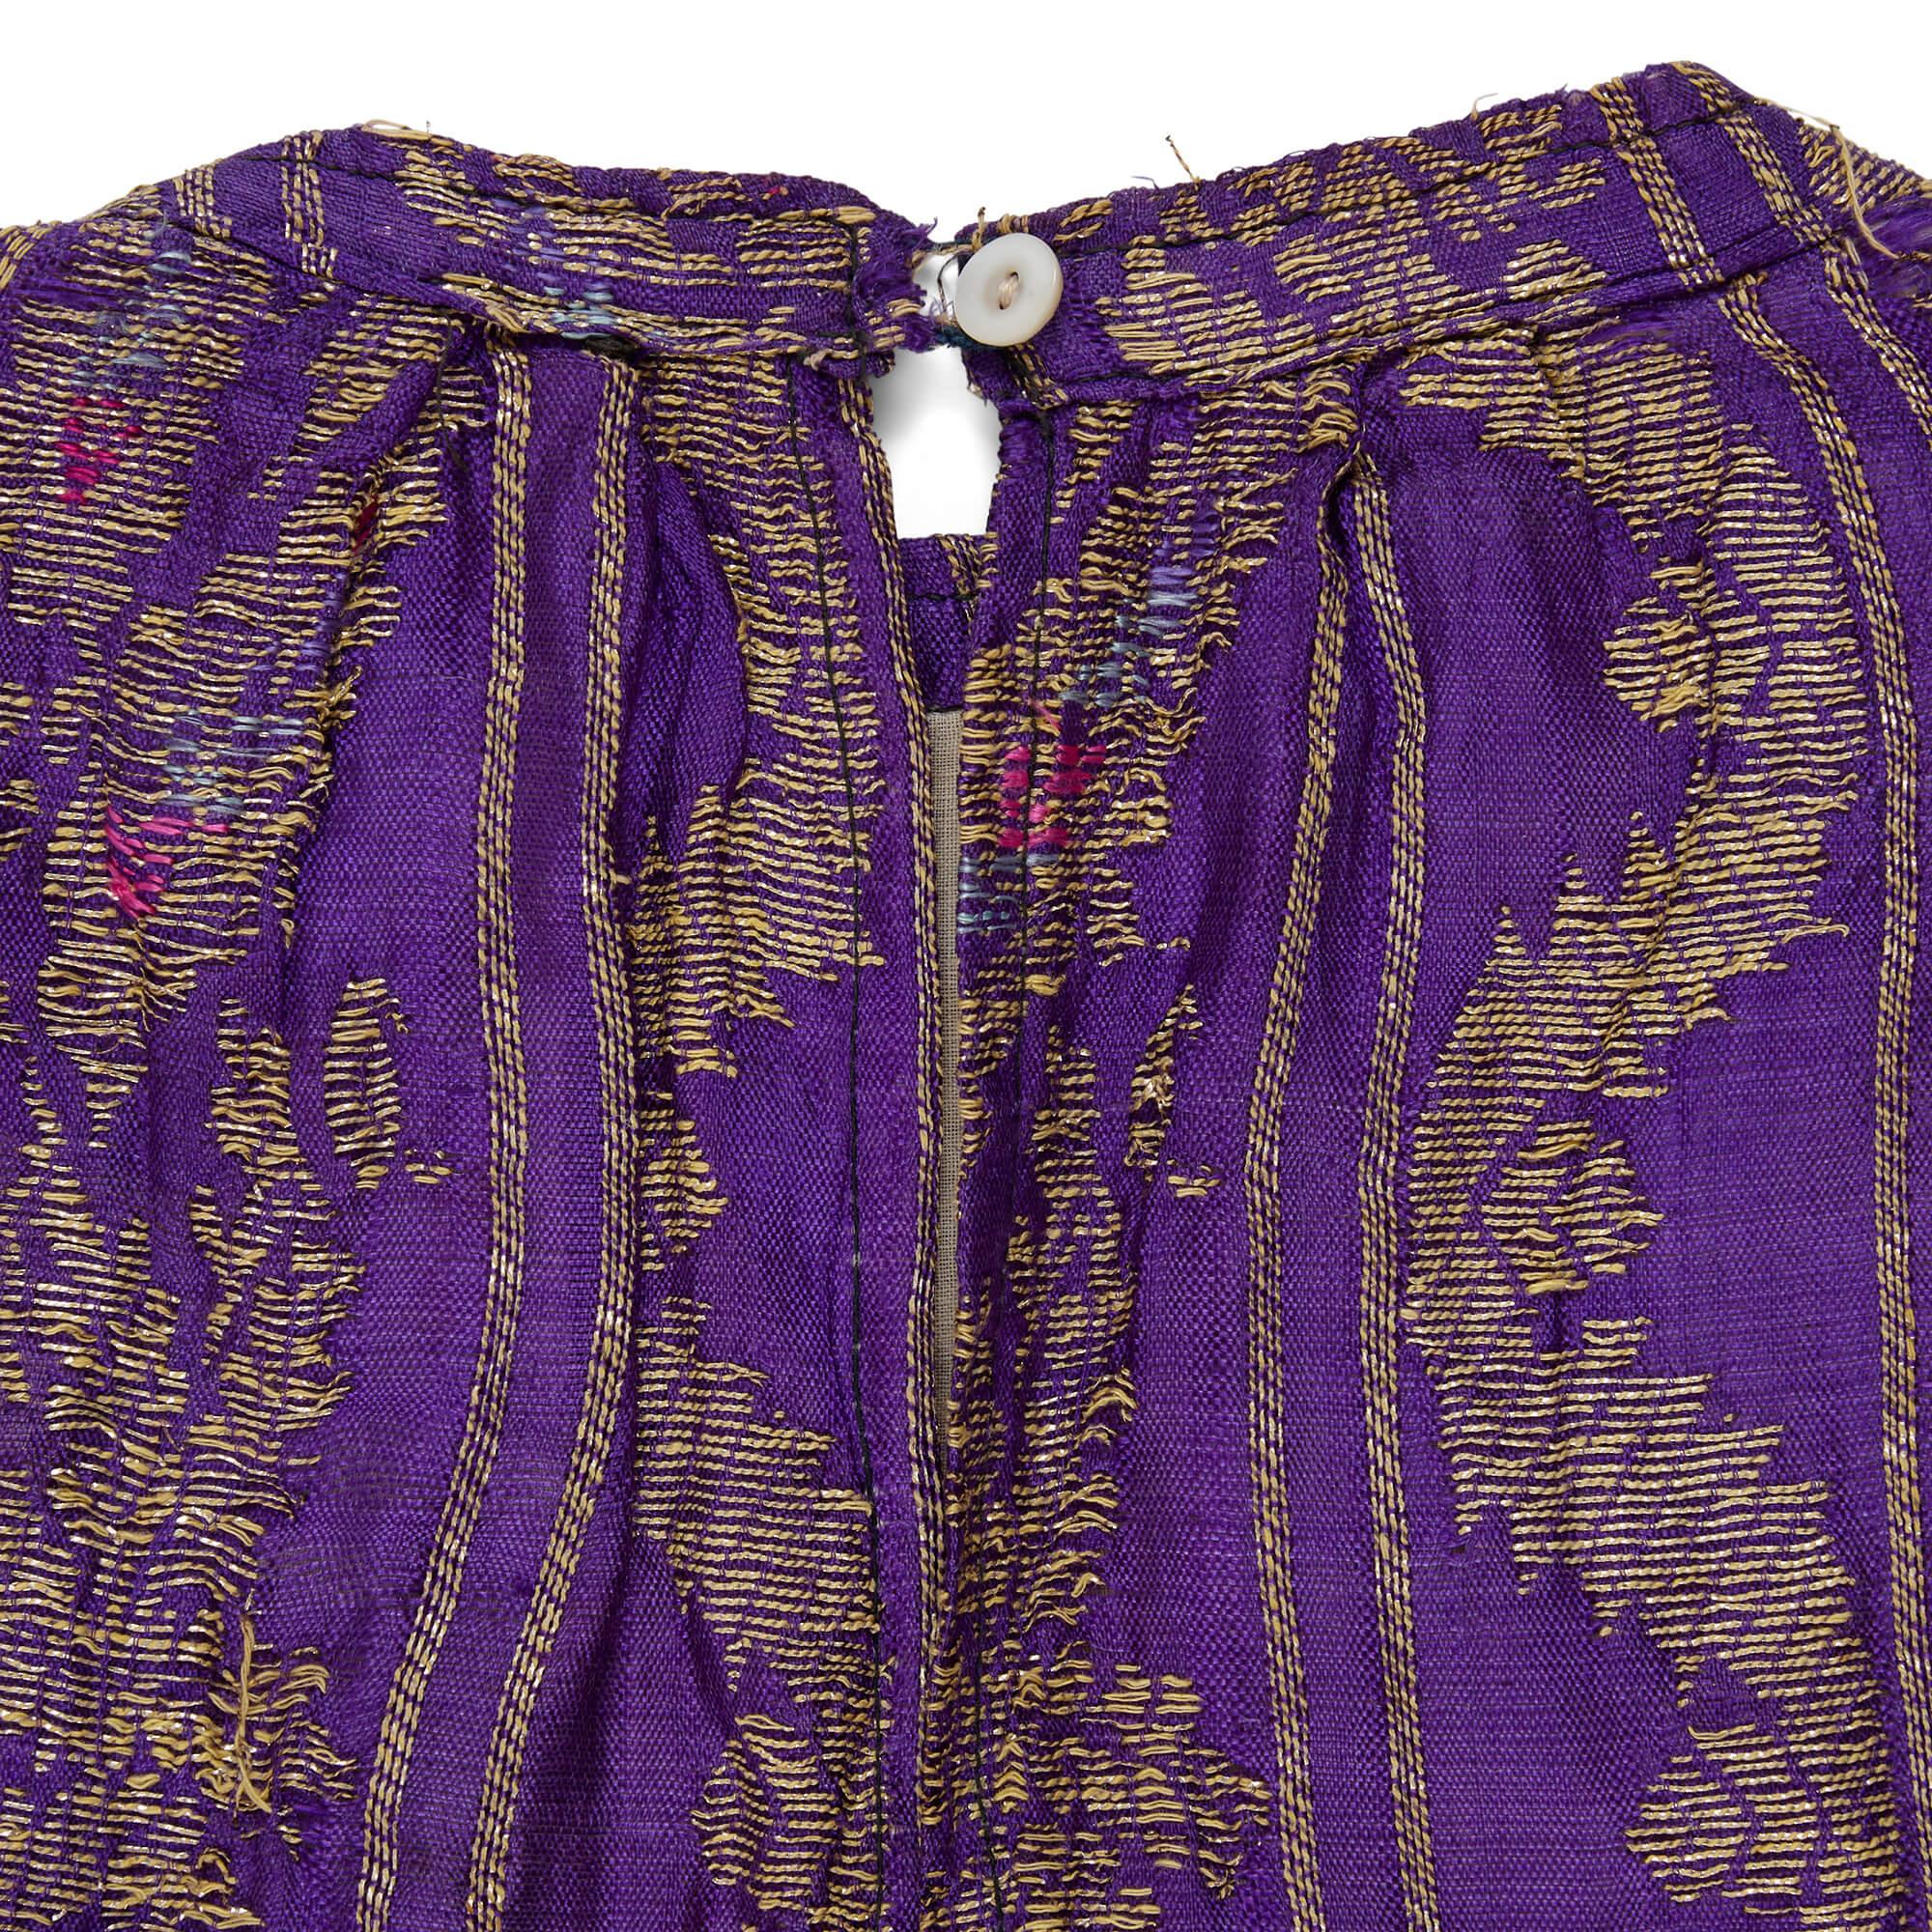 19th Century Turkish Ottoman Period Embroidered Caftan For Sale 2